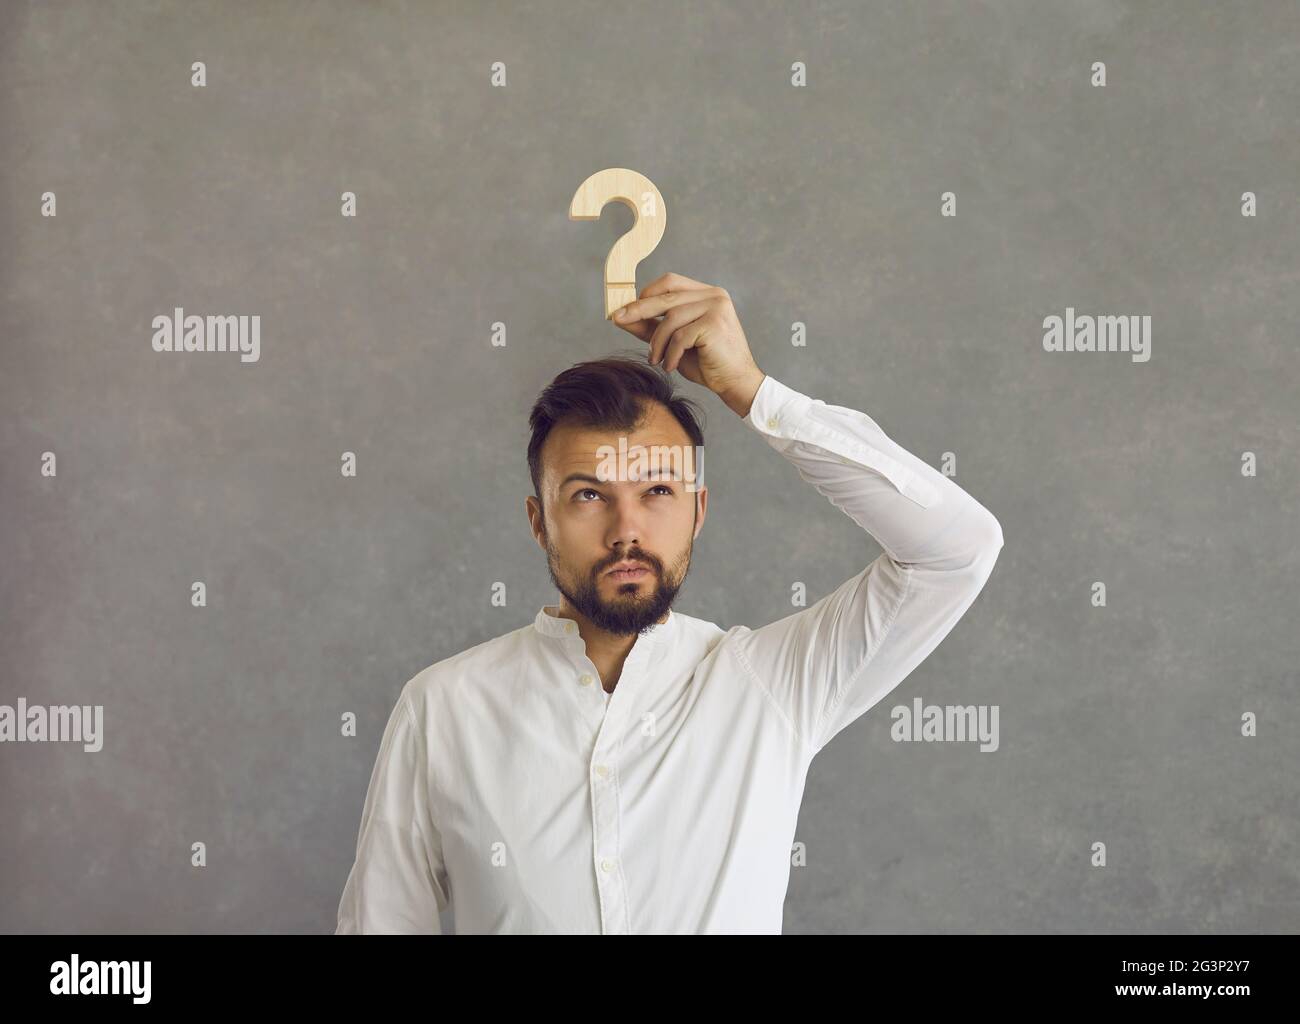 Confused man holding a question mark and thinking of an answer to a difficult question Stock Photo